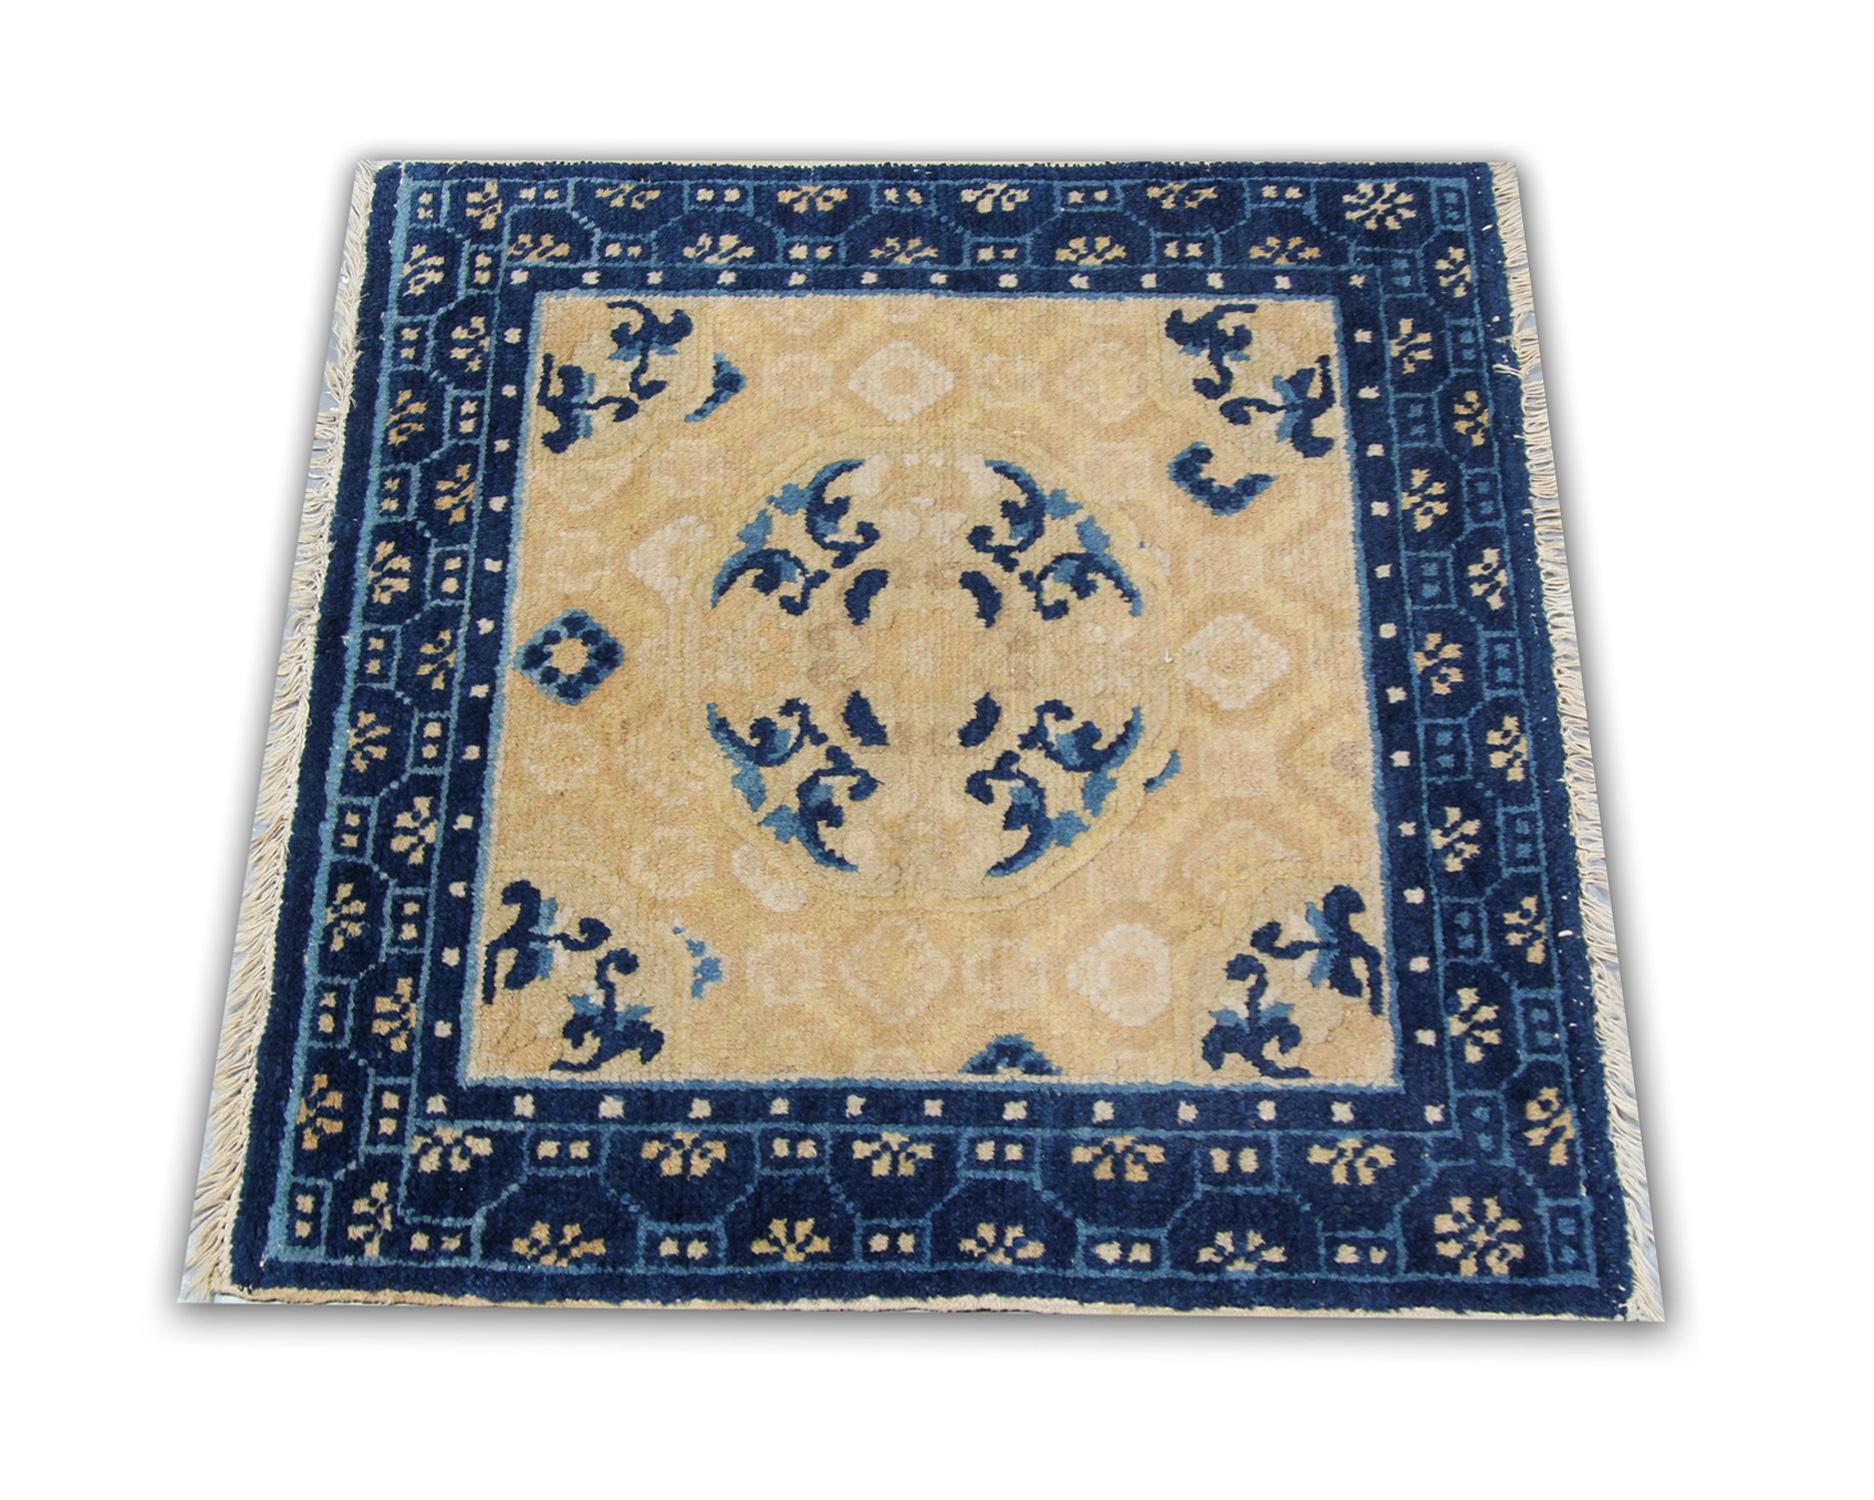 This wool rug is one the unusual rugs of the 1880s which are Art Deco rugs in the most excellent condition with gold background color contrasting the light brown border and the motives. This patterned rug is a combination of a floral rug and